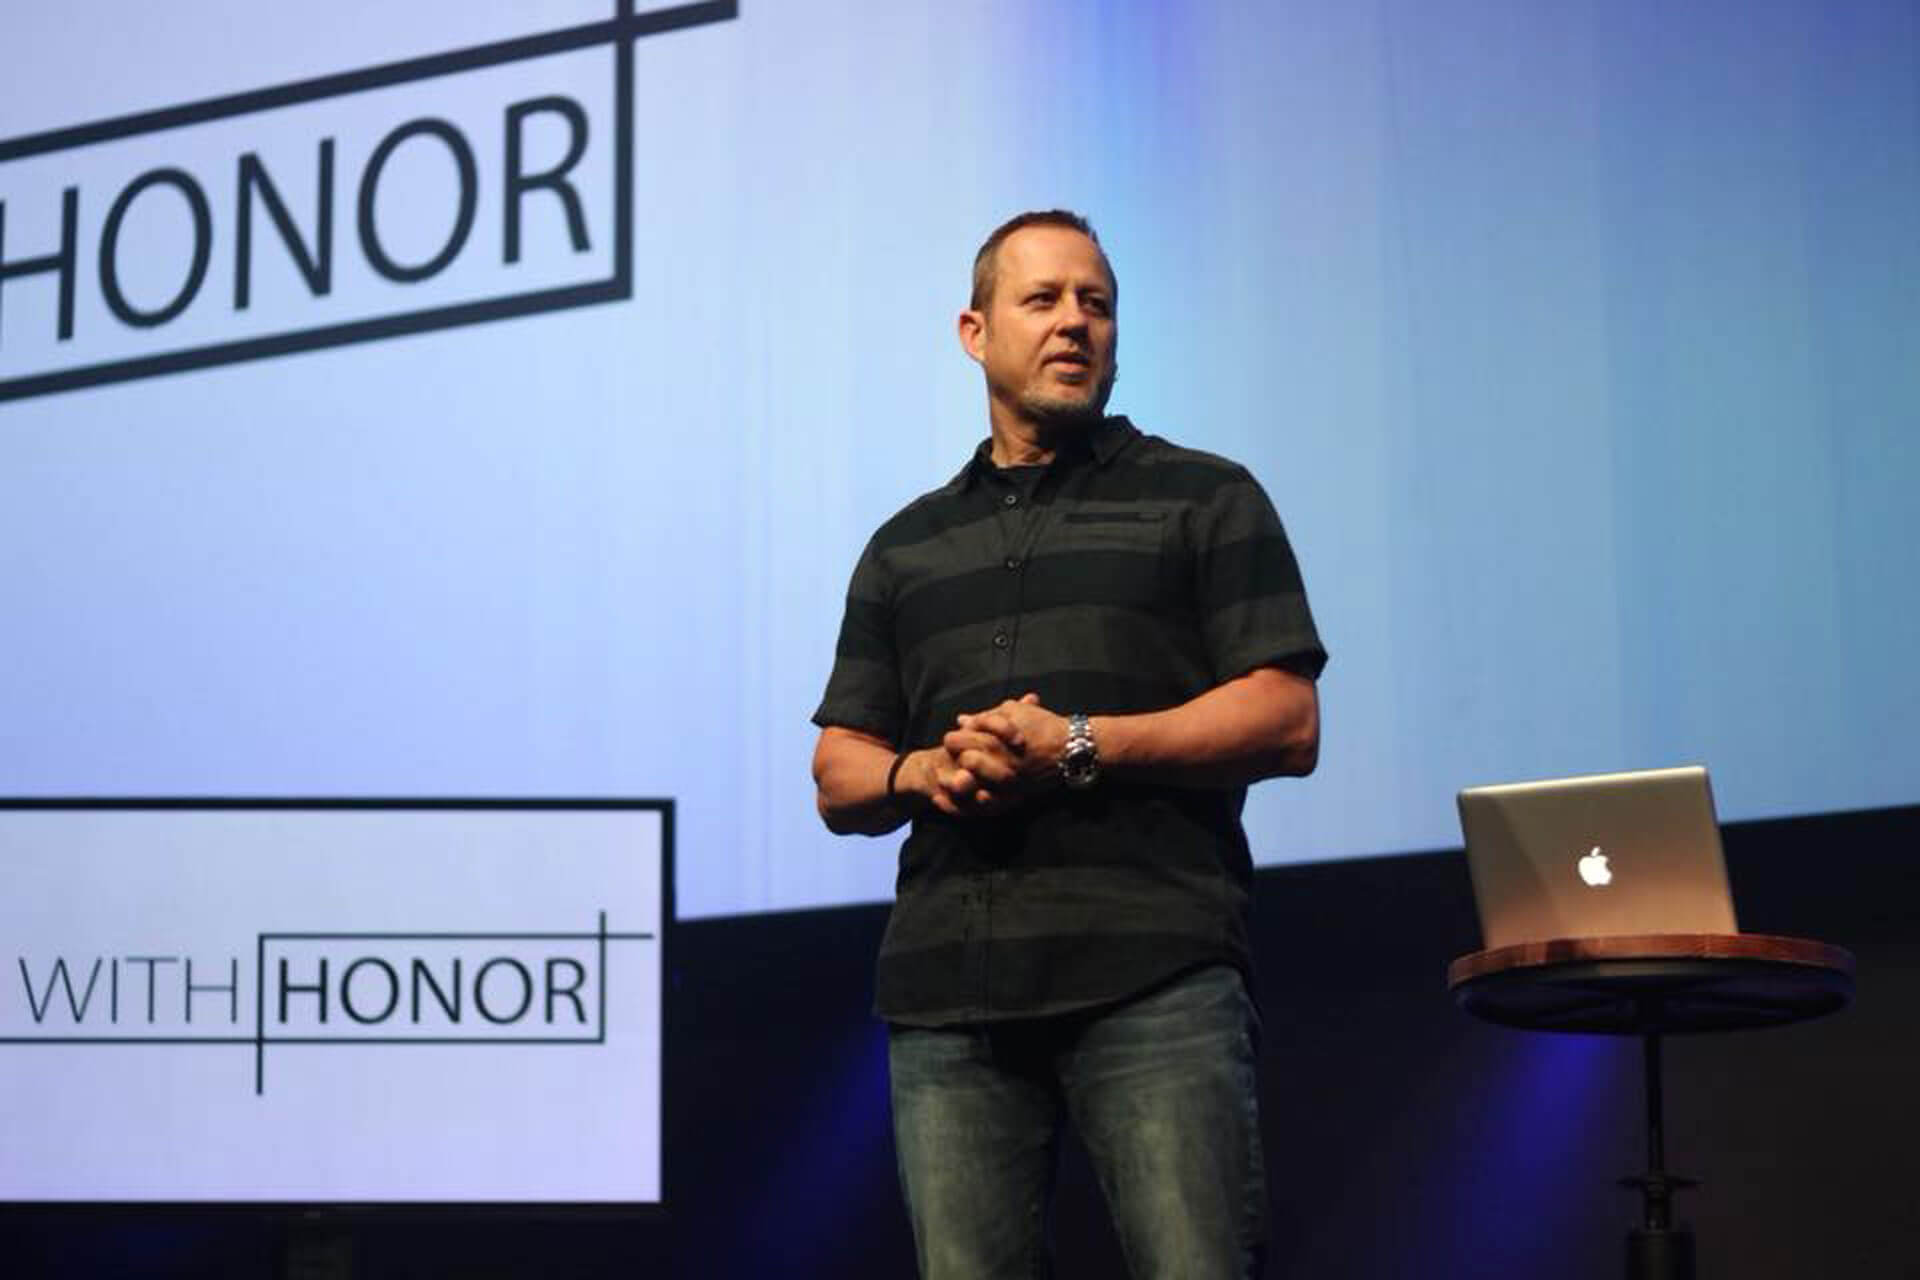 Man presenting on stage with text "with honor" on screen behind him.